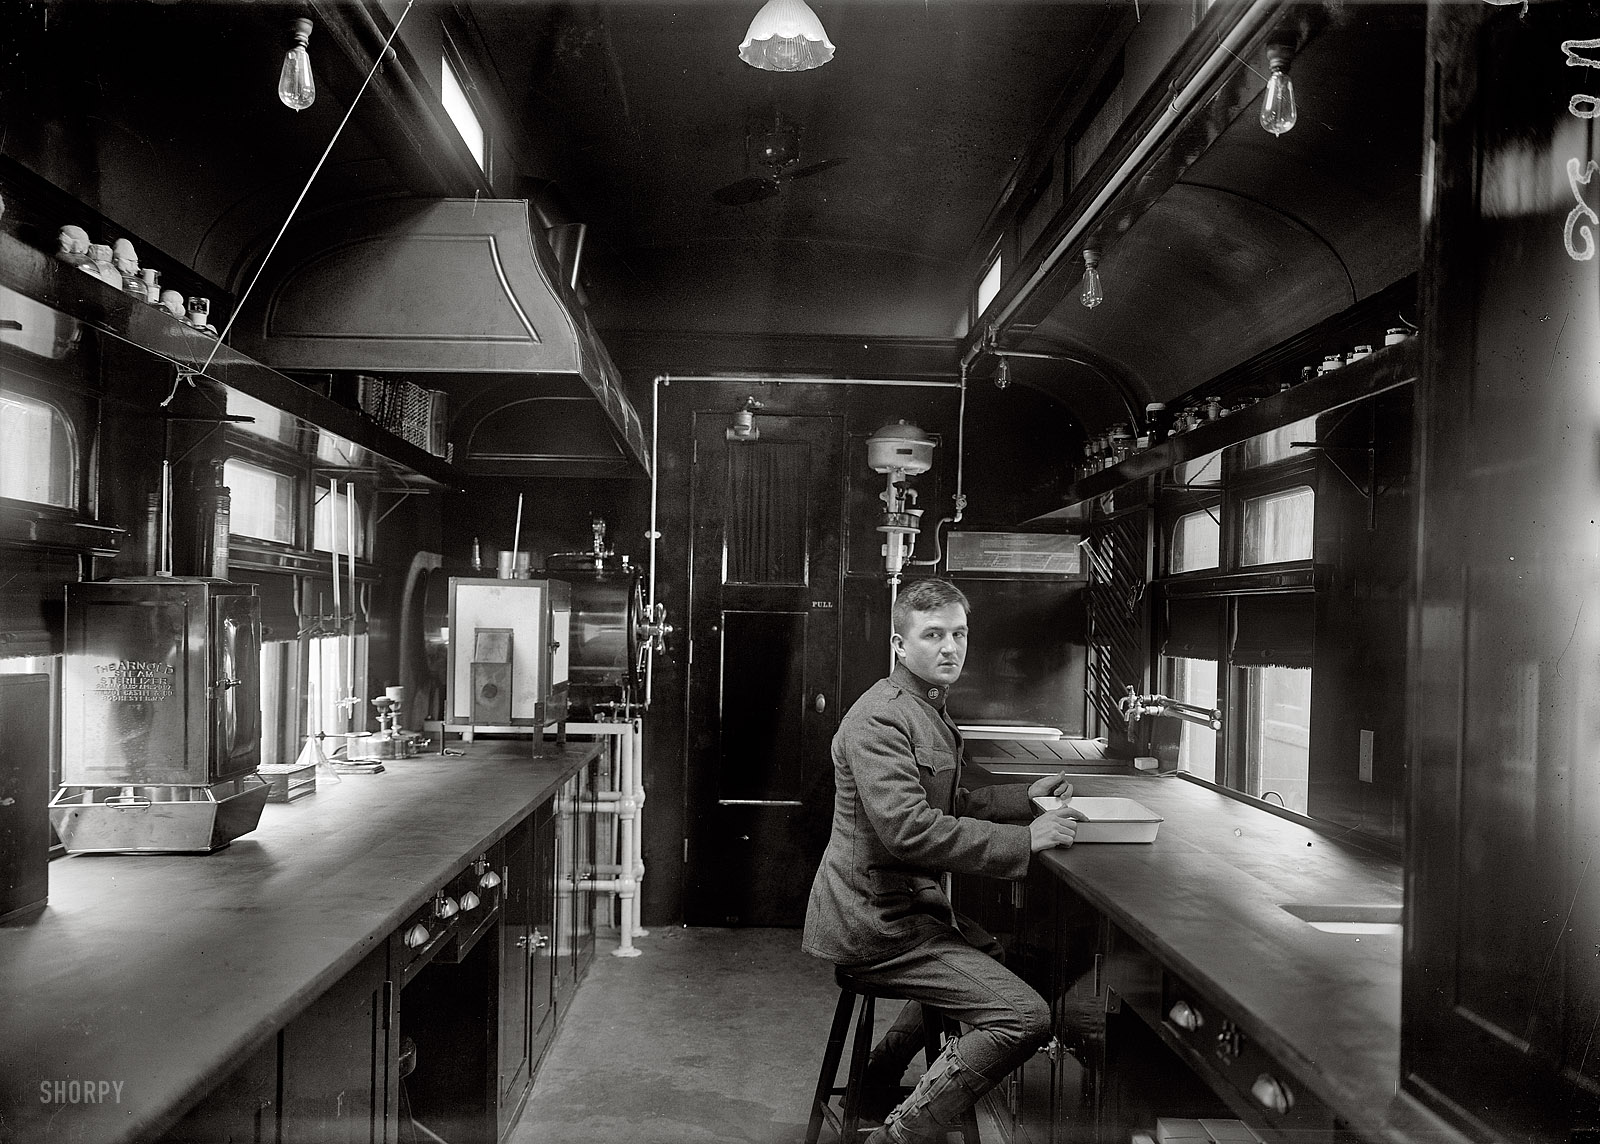 1917. "American Red Cross sanitary railroad car." The "sanitary trains" of World War I played a major role in the delivery of relief supplies and medical care to Allied prisoners in Europe, as well as their repatriation after the Armistice. Harris & Ewing Collection glass negative, Library of Congress. View full size.